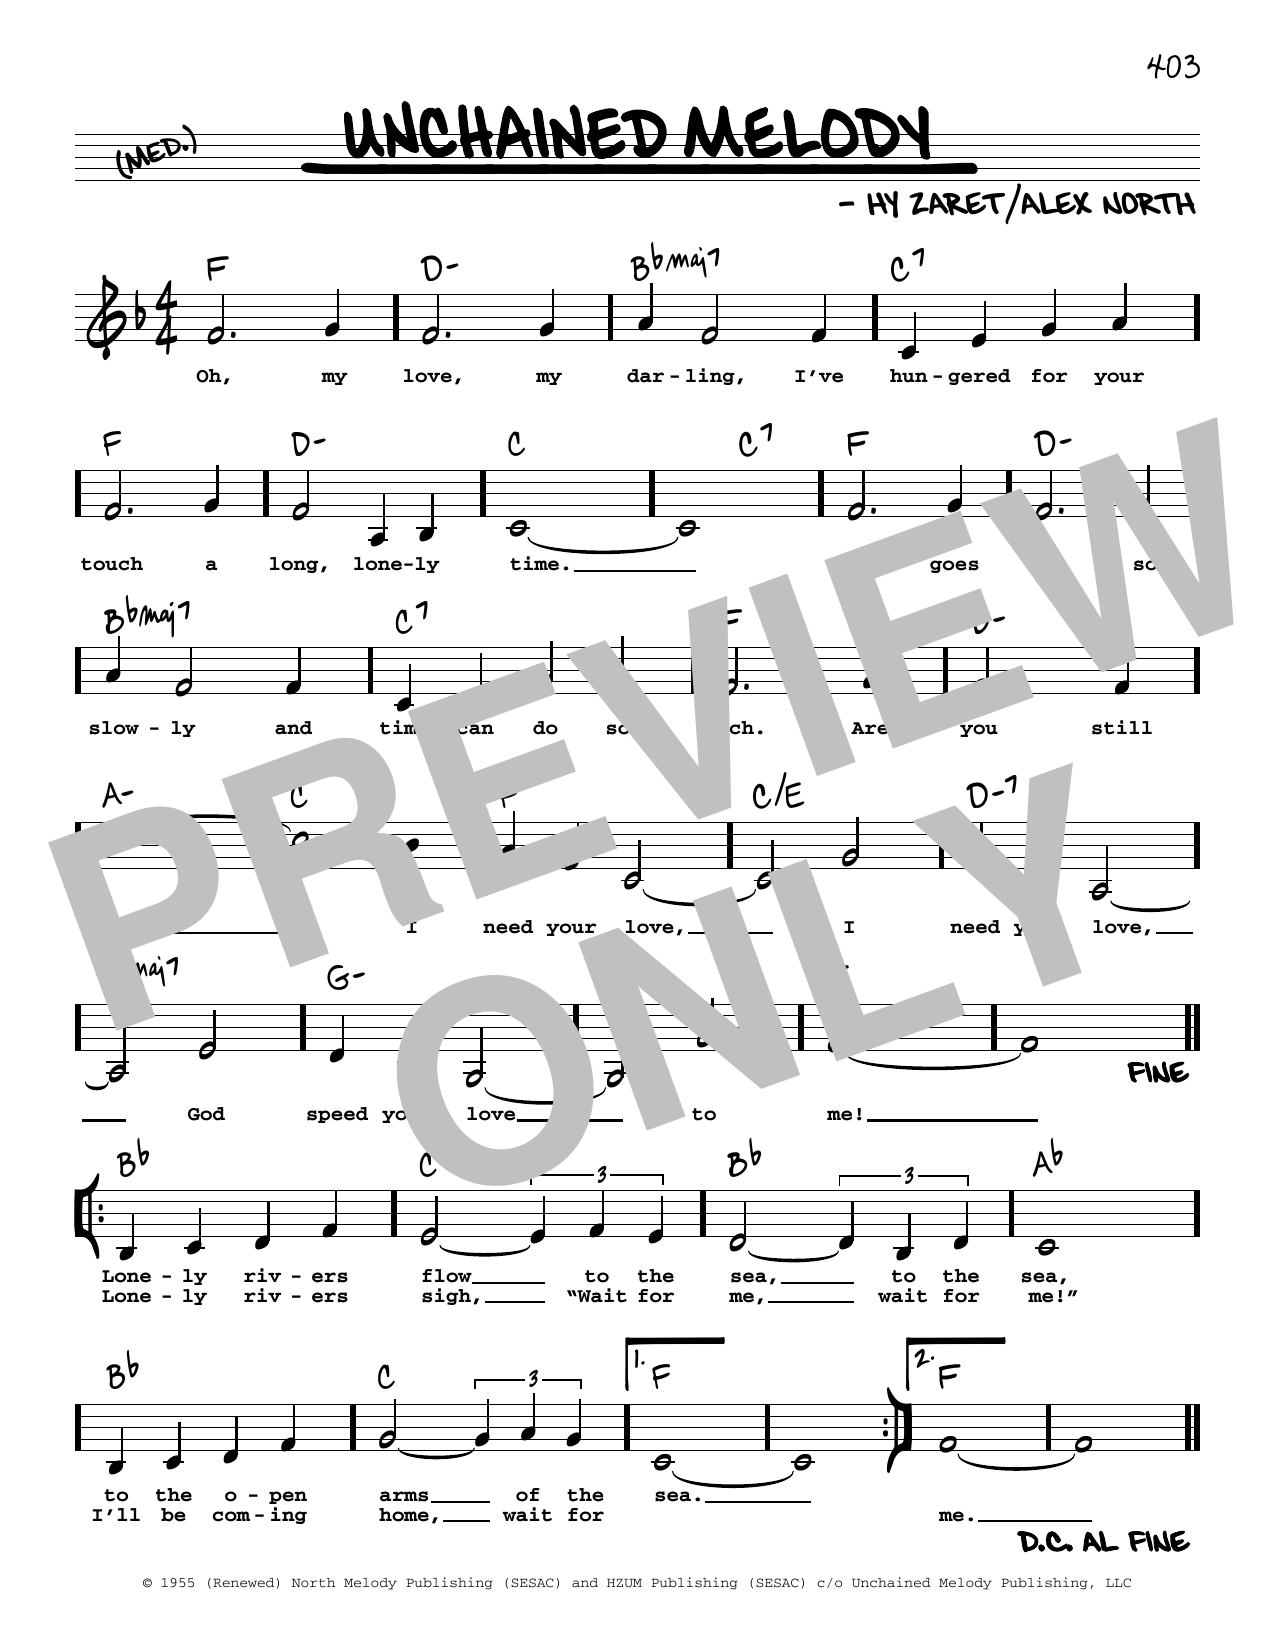 Download The Righteous Brothers Unchained Melody (Low Voice) Sheet Music